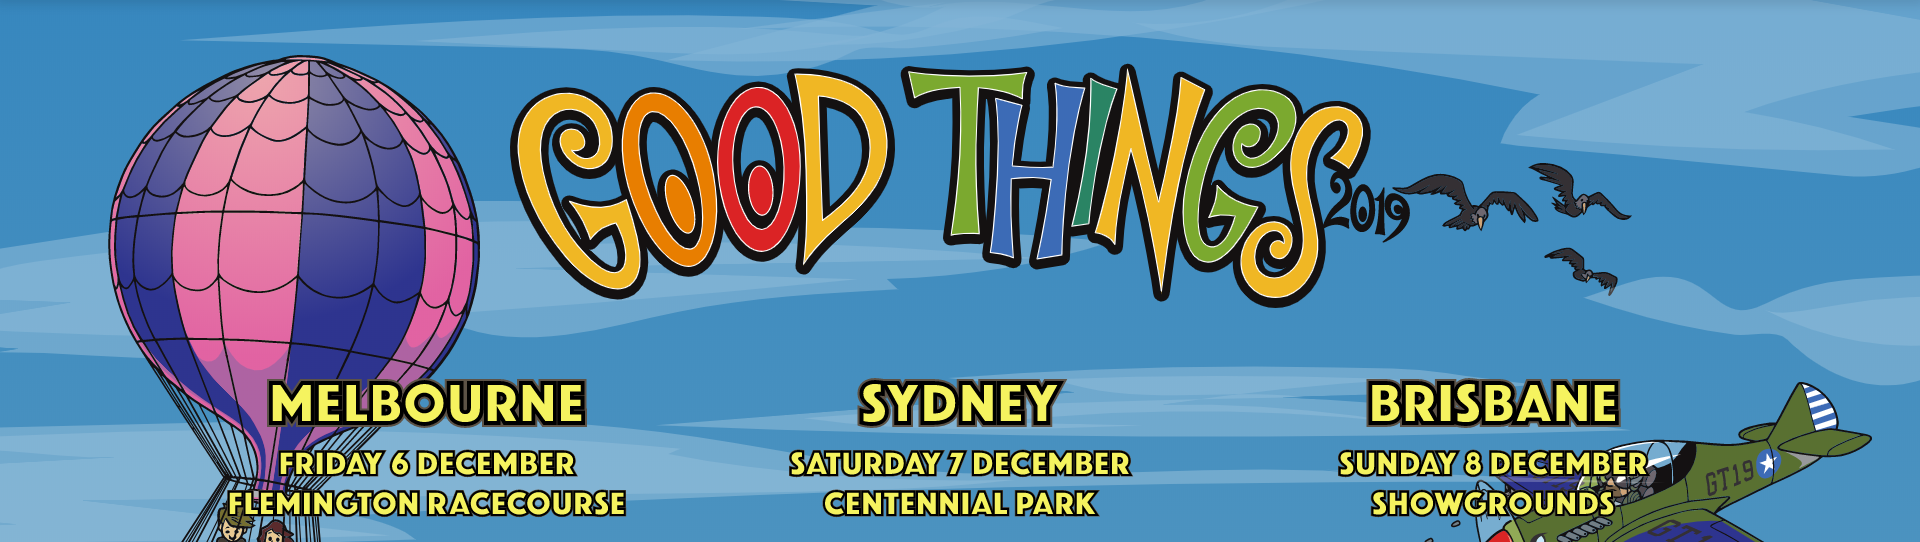 Your band could play at GOOD THINGS FESTIVAL - Everyday Metal